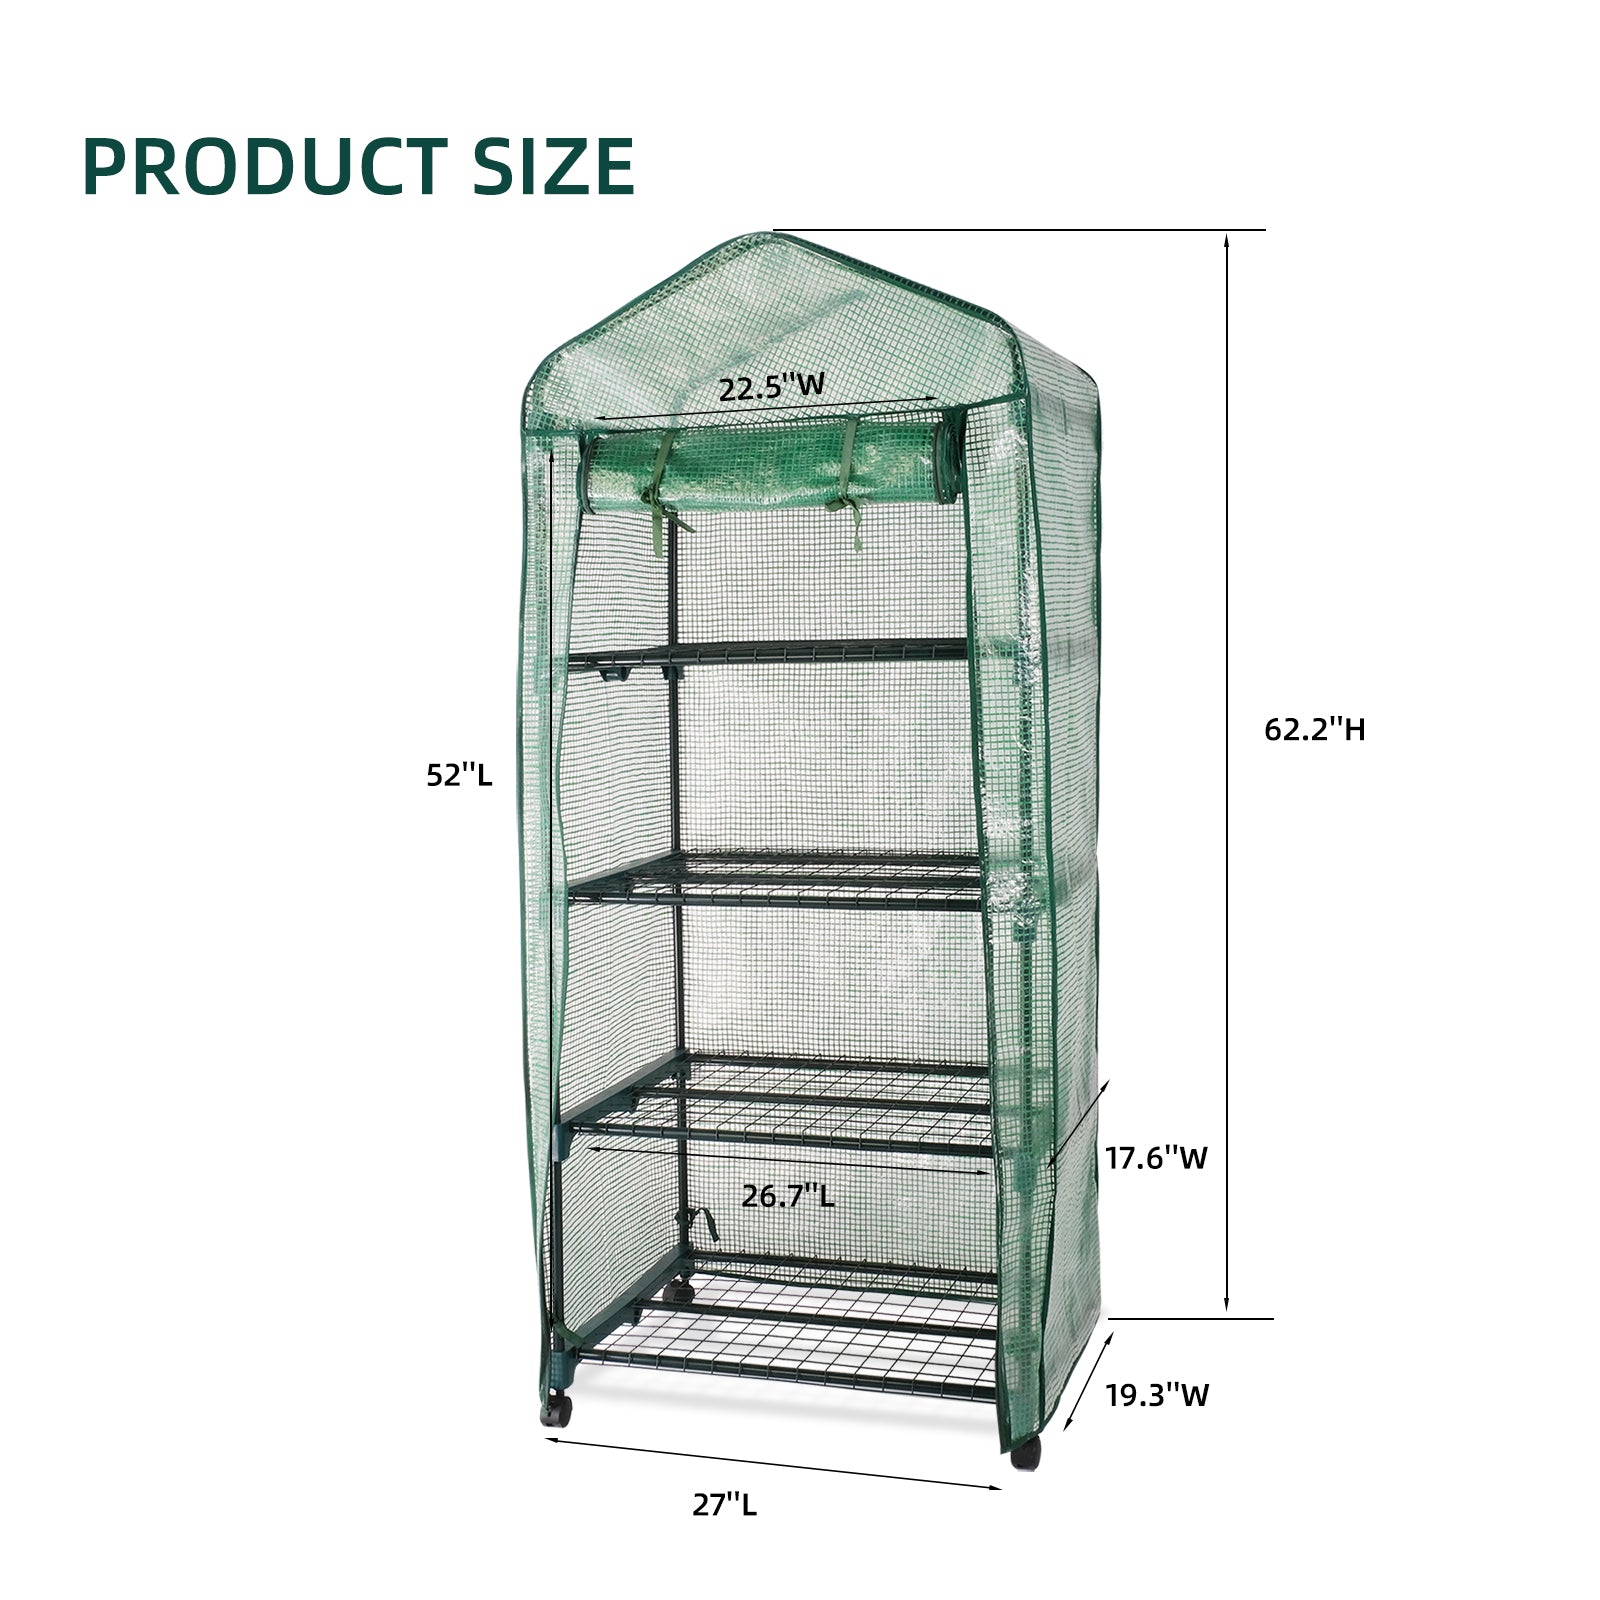 4 Tiers Mini Greenhouse with Caster Wheels Portable Outdoor Planter House